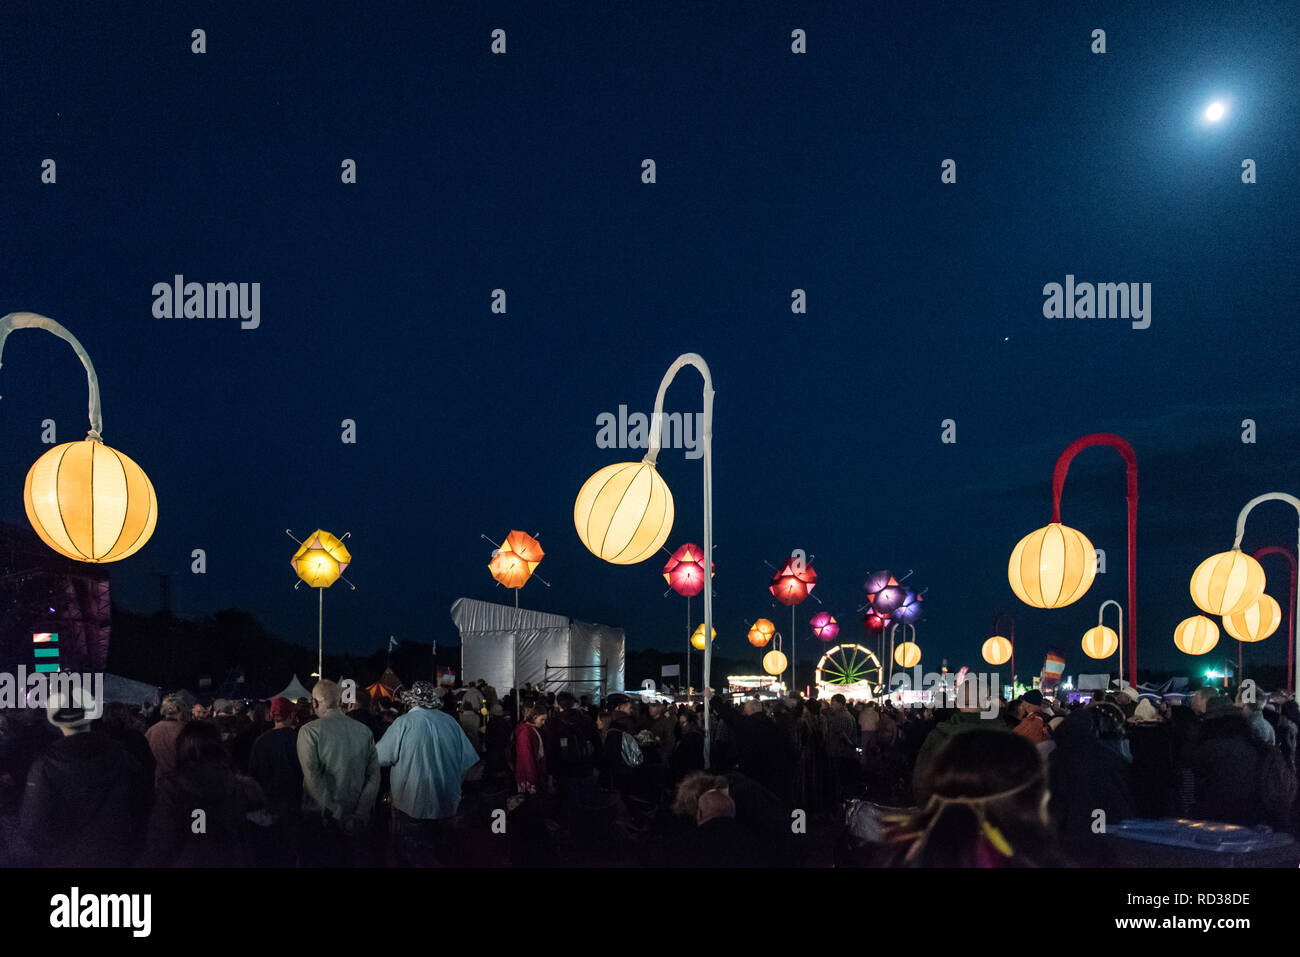 Music festival at night showing the crowd an lanterns Stock Photo